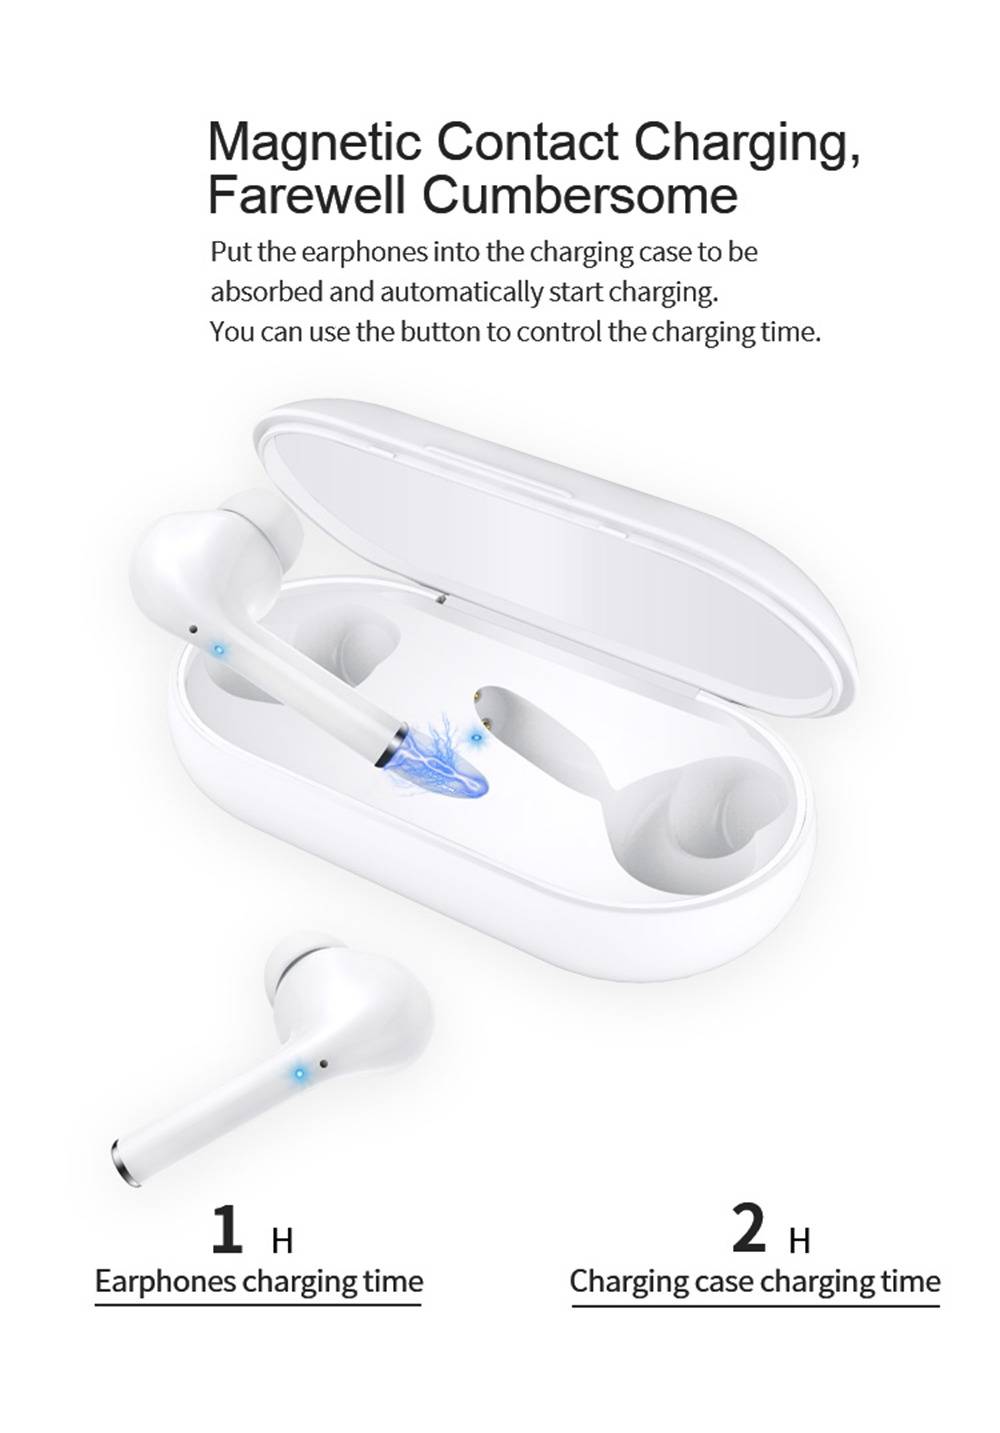 Myinnov MKJM6S Dual Bluetooth 5.0 Earbuds Touch Control About 8 Hours Working Time - Black